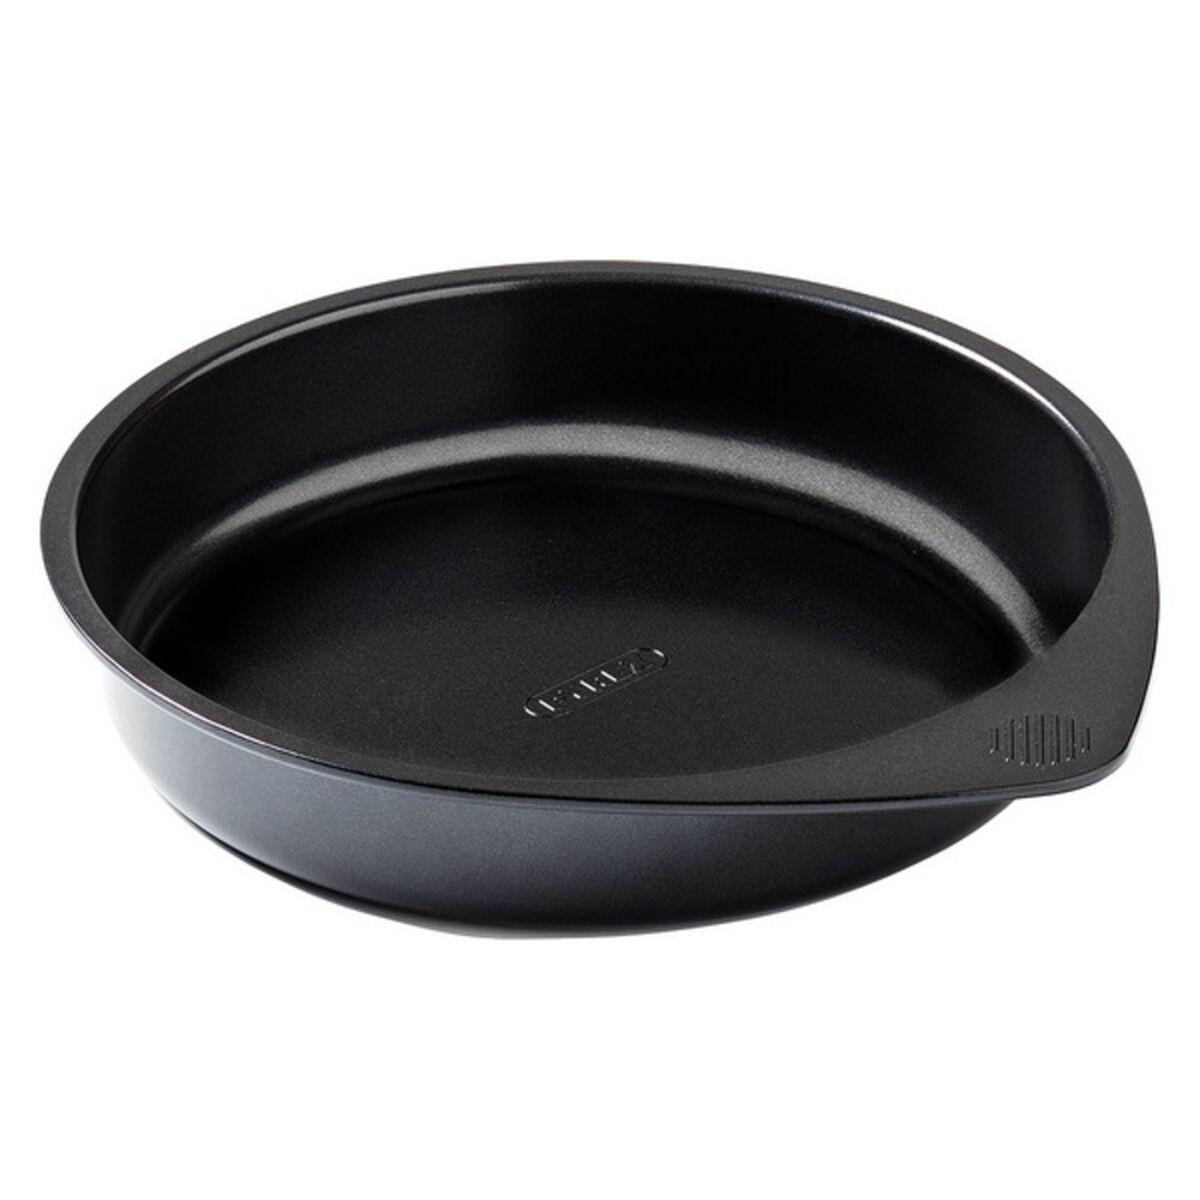 Cakevorm Pyrex Magic Roestvrij staal (20 cm)